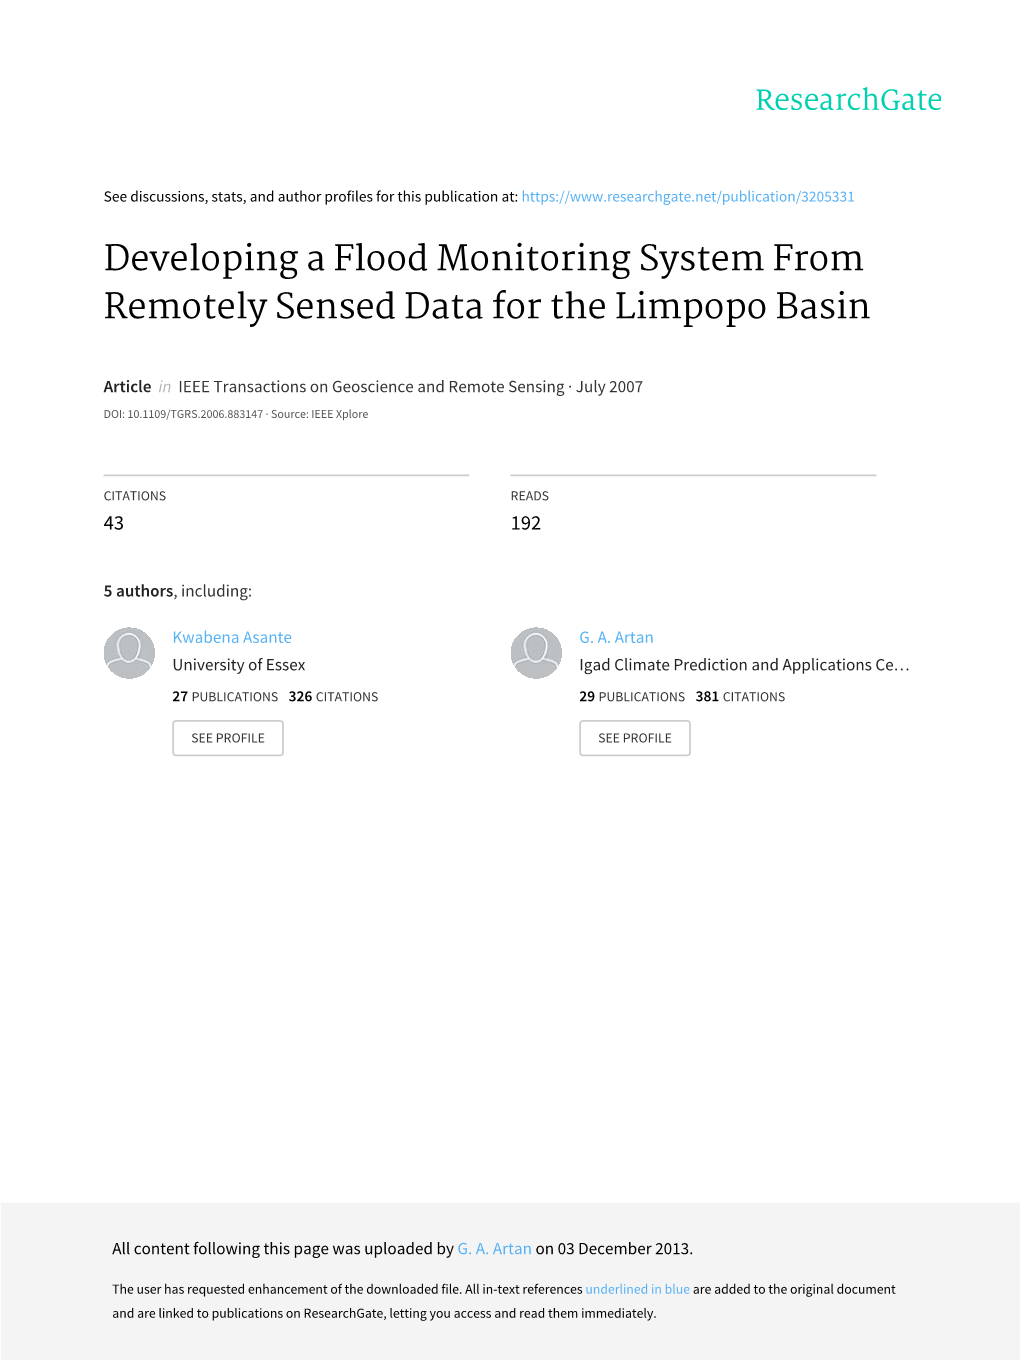 Developing a Flood Monitoring System from Remotely Sensed Data for the Limpopo Basin